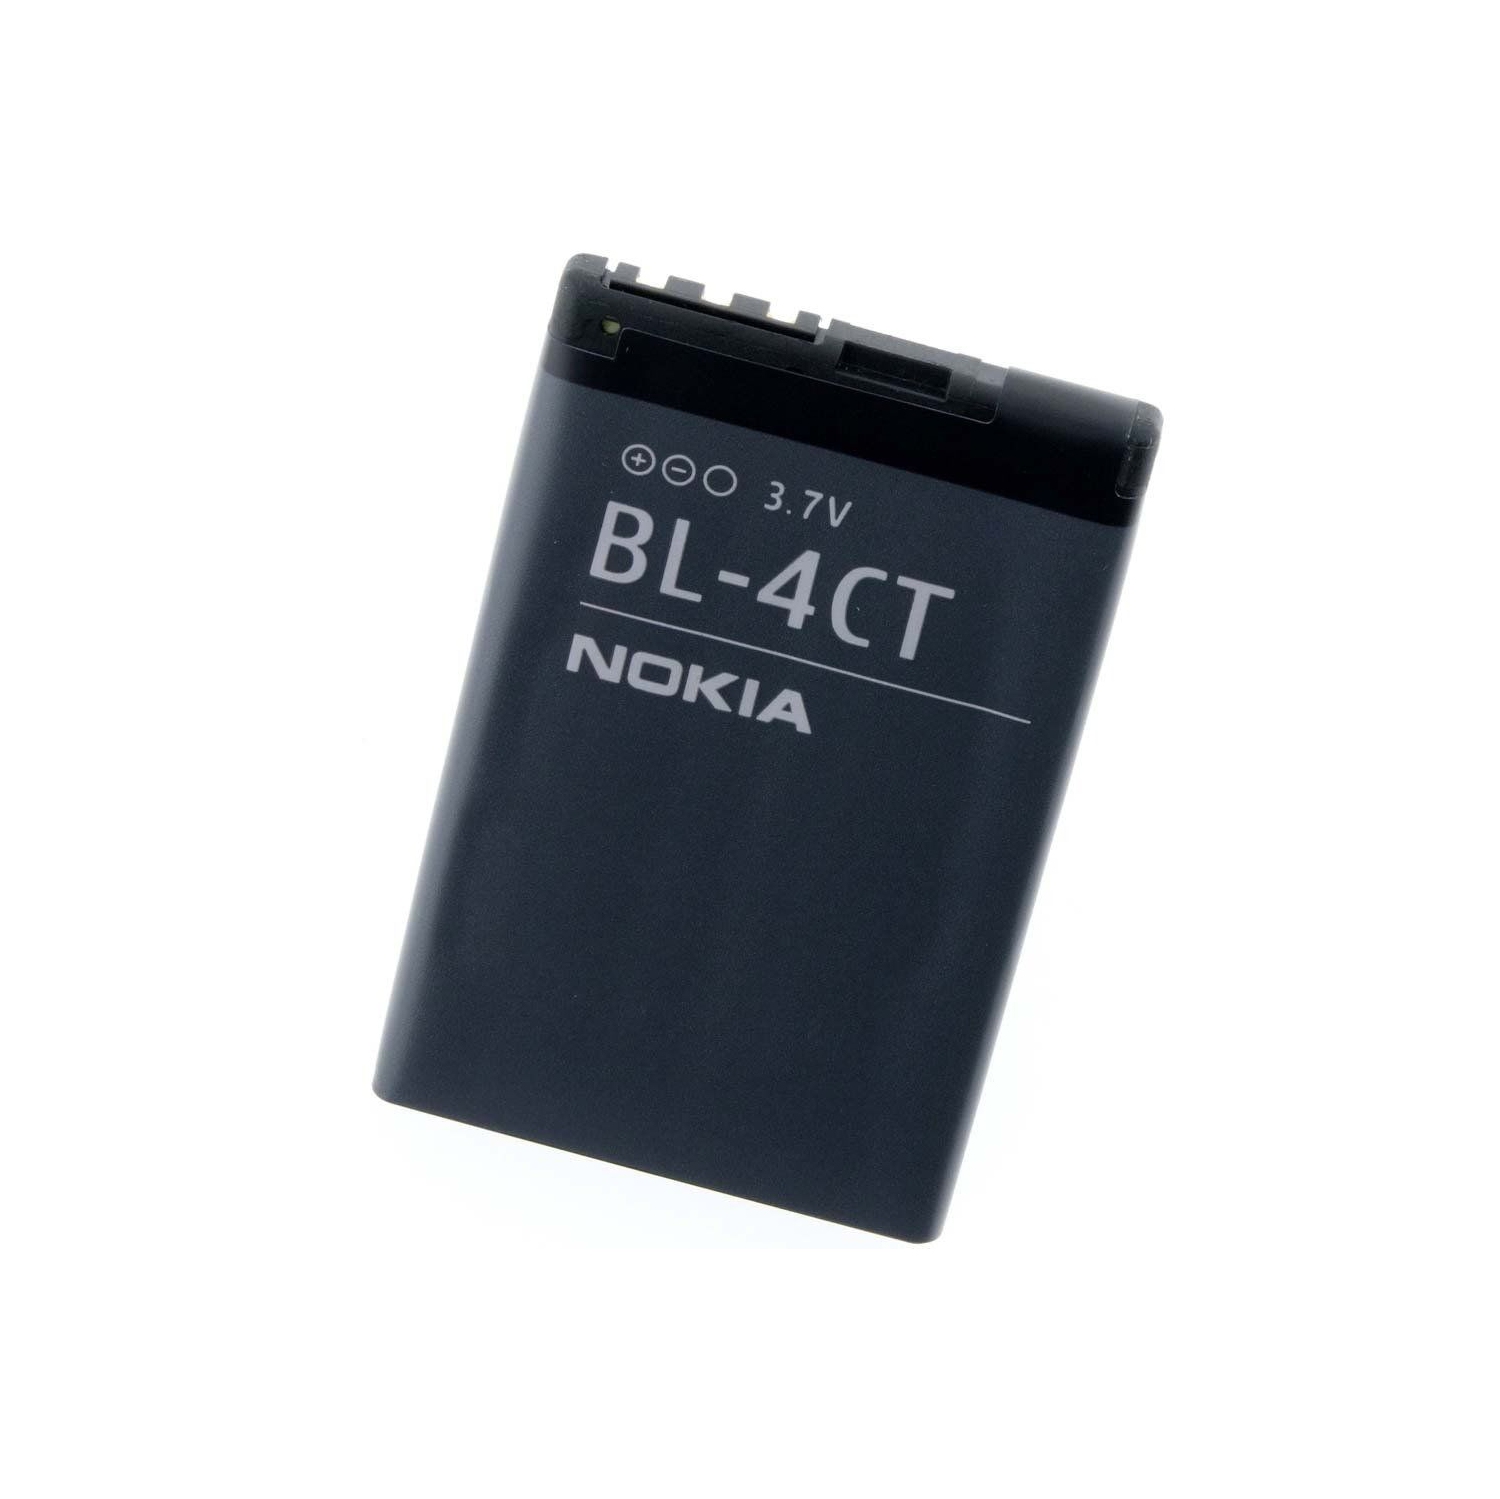 BL-4CT Replacement Battery for Nokia X3 2720 5310 5630 6700 7230 7210 7310